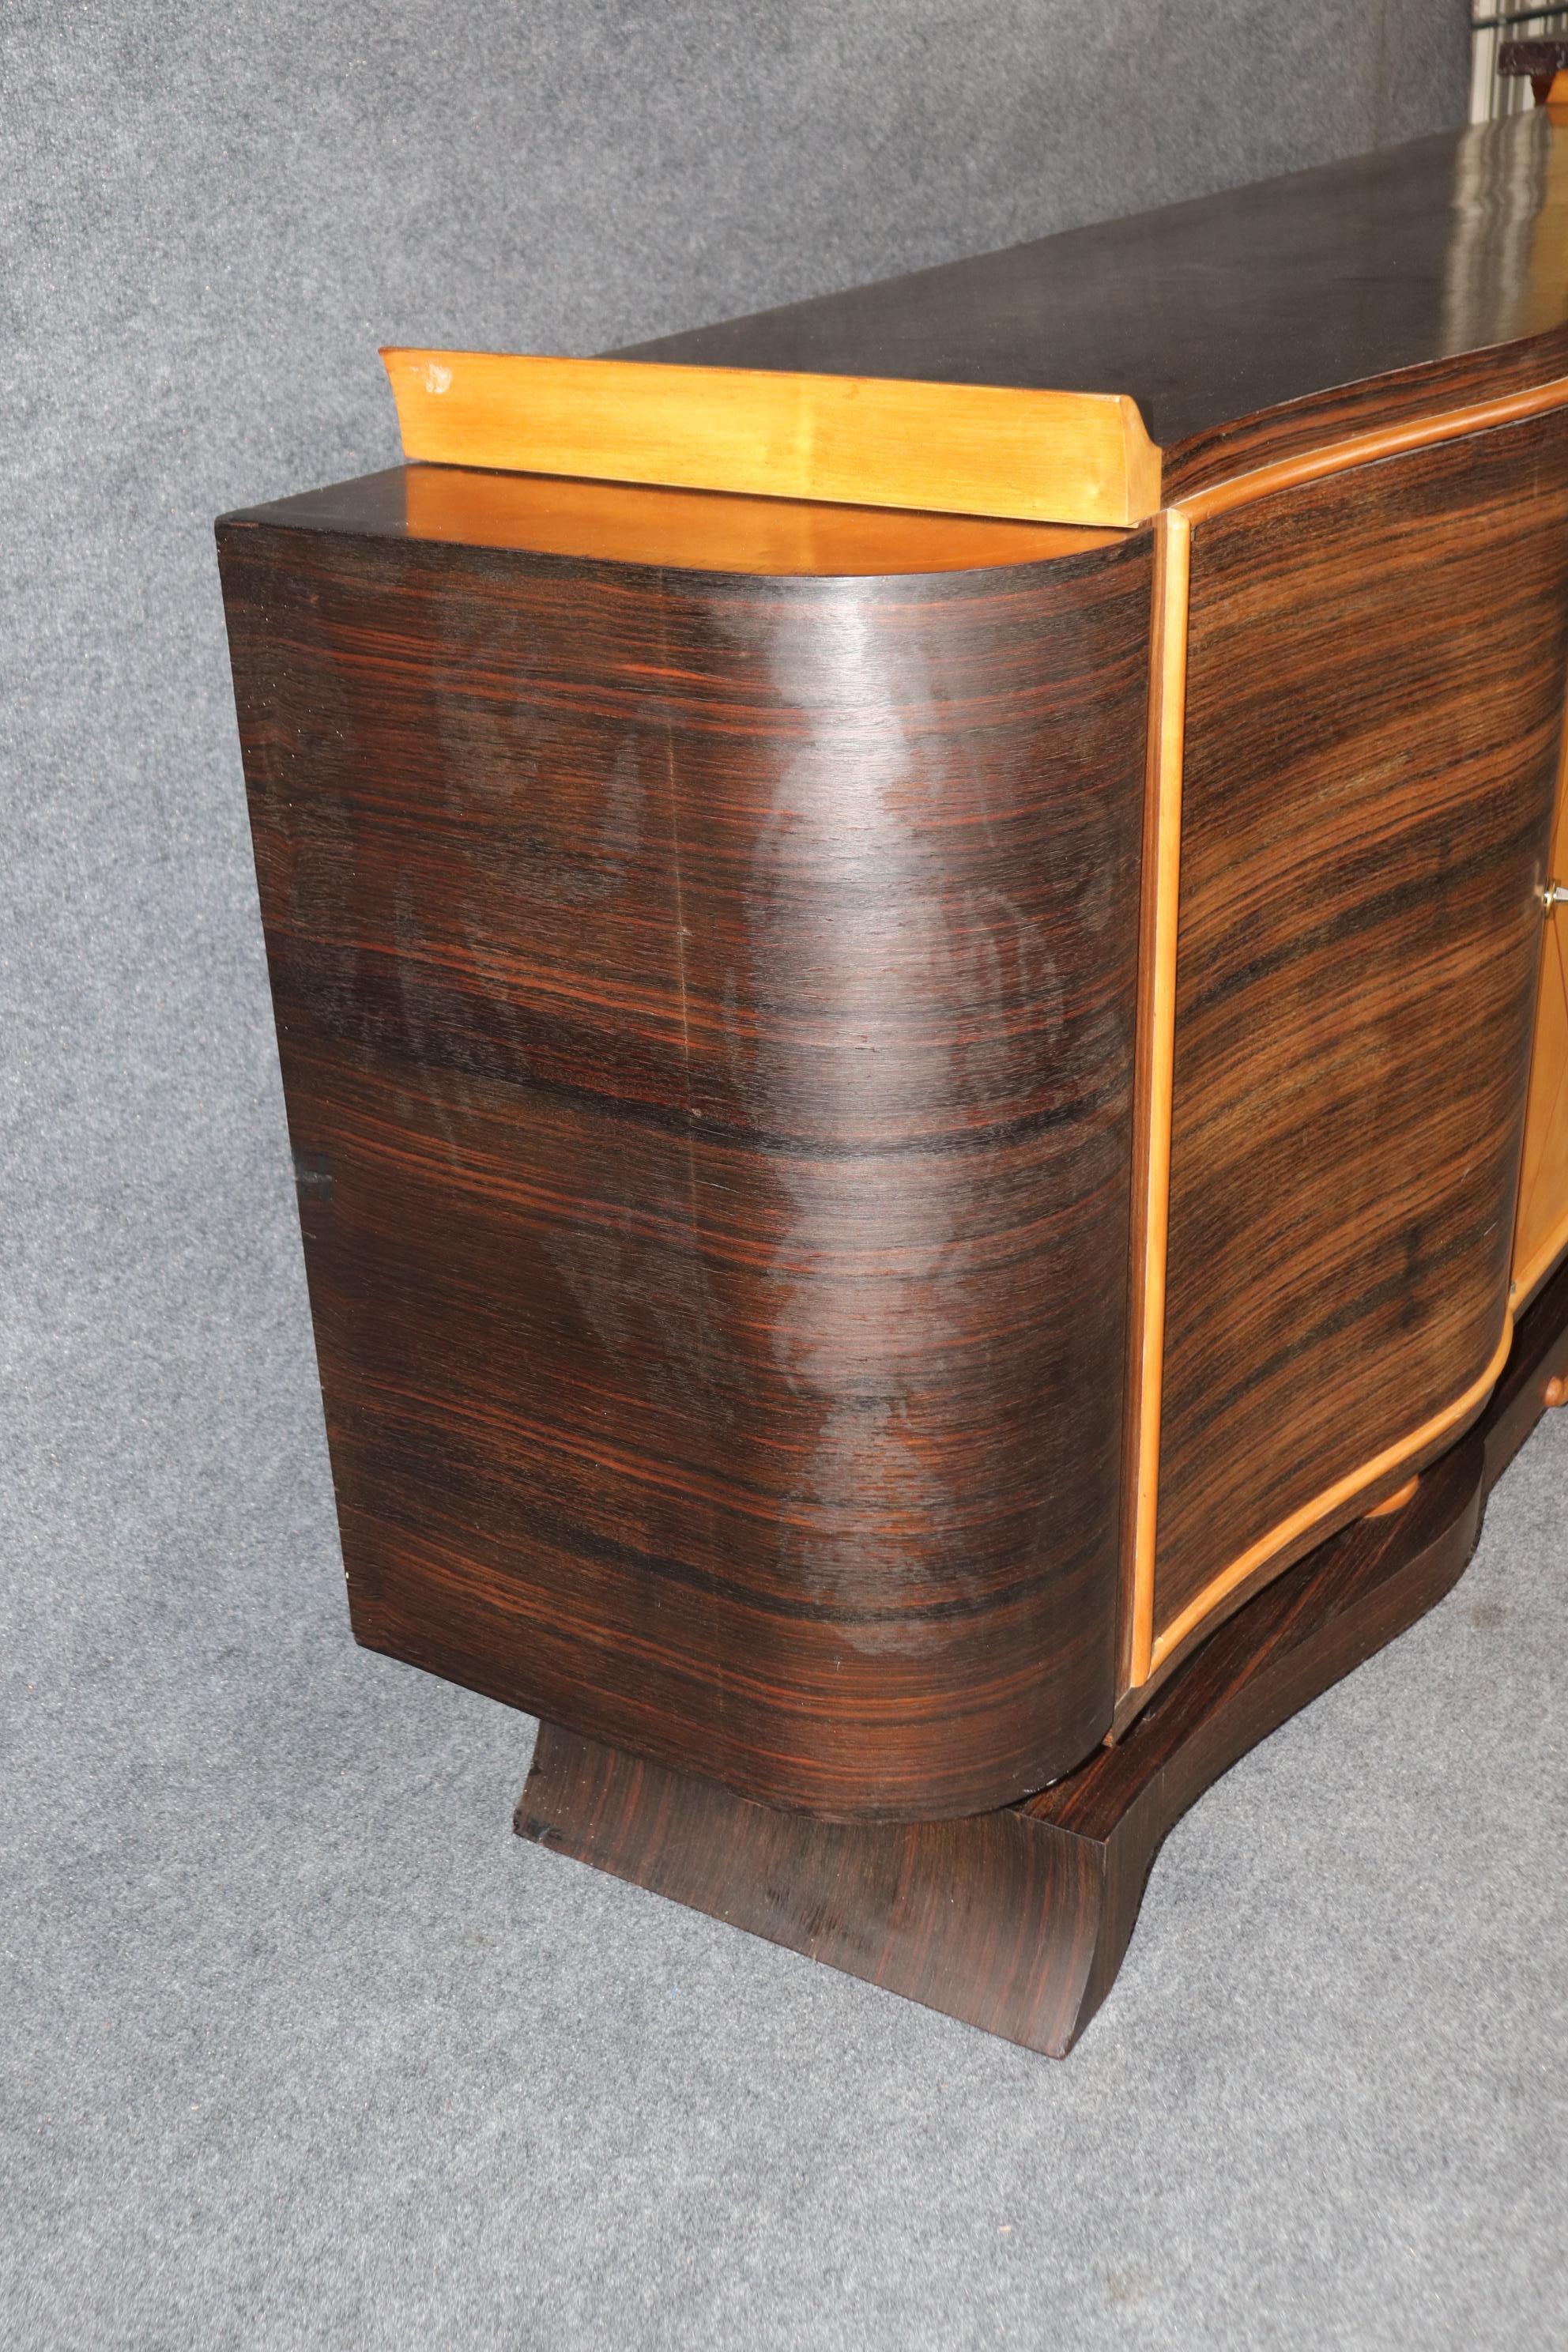 Rare Macassar Ebony and Satinwood French Art Deco Sideboard in The manner Leleu For Sale 1